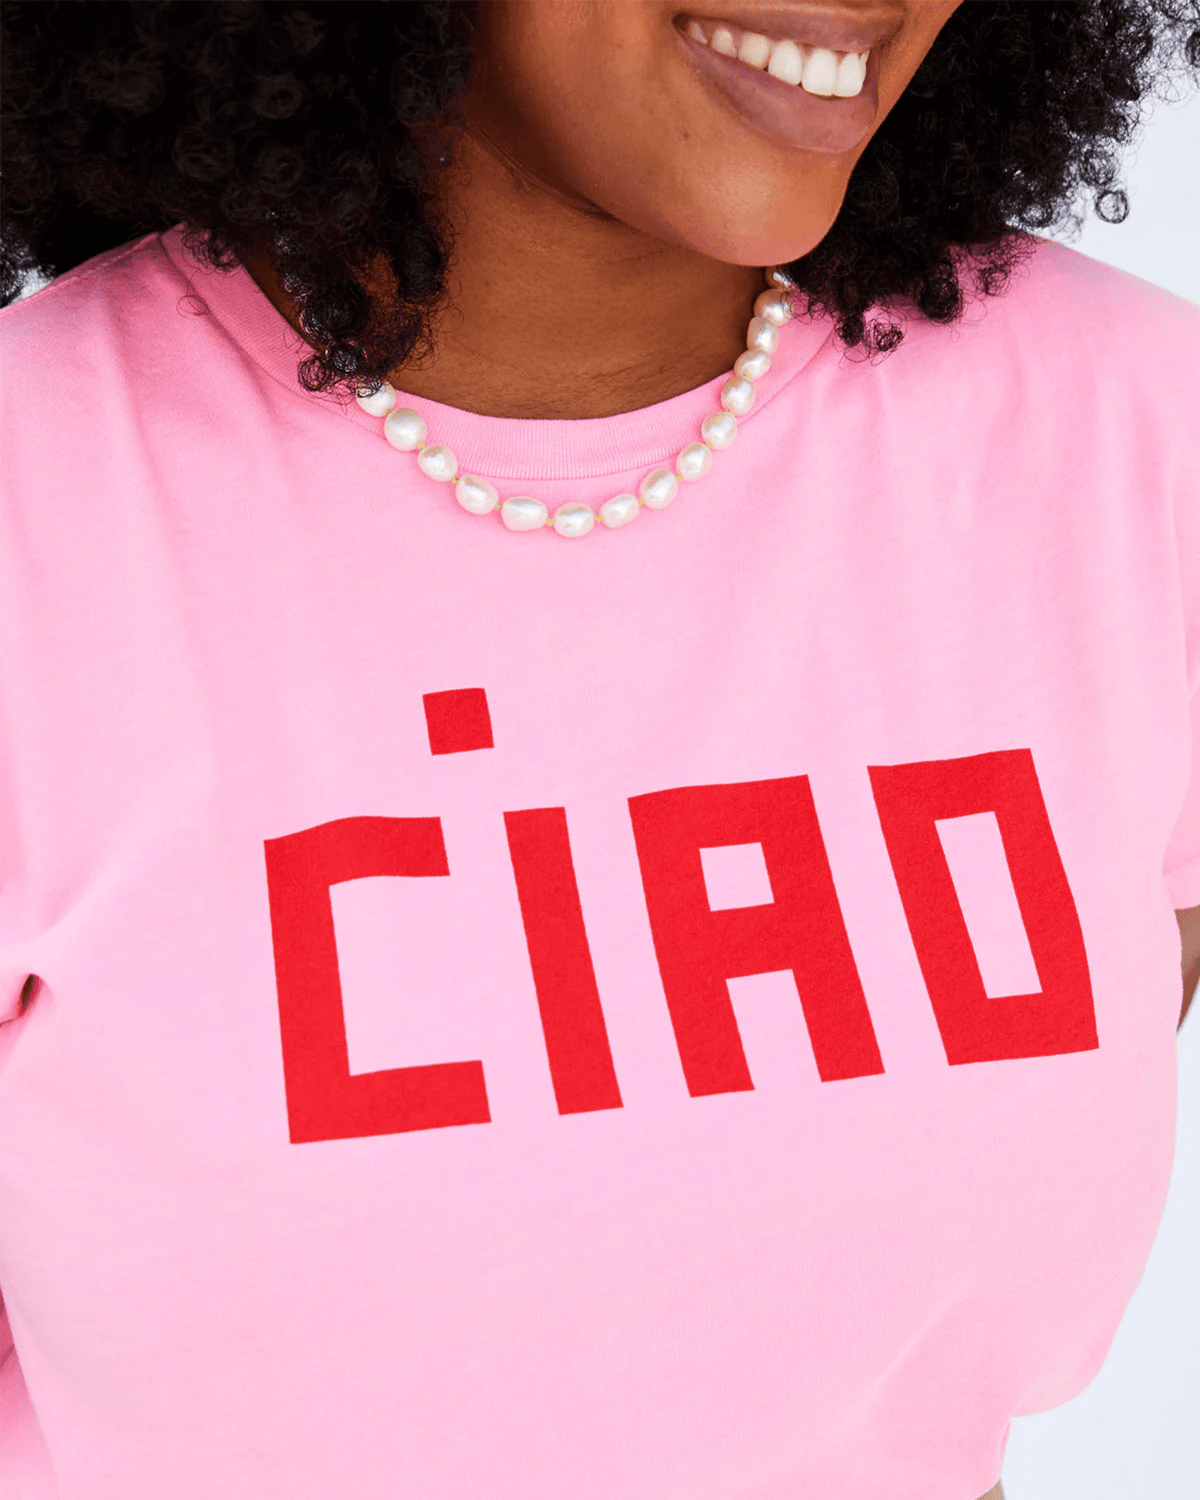 Clare V. Clothing Block Ciao Classic Tee in Neon Pink w/ Poppy